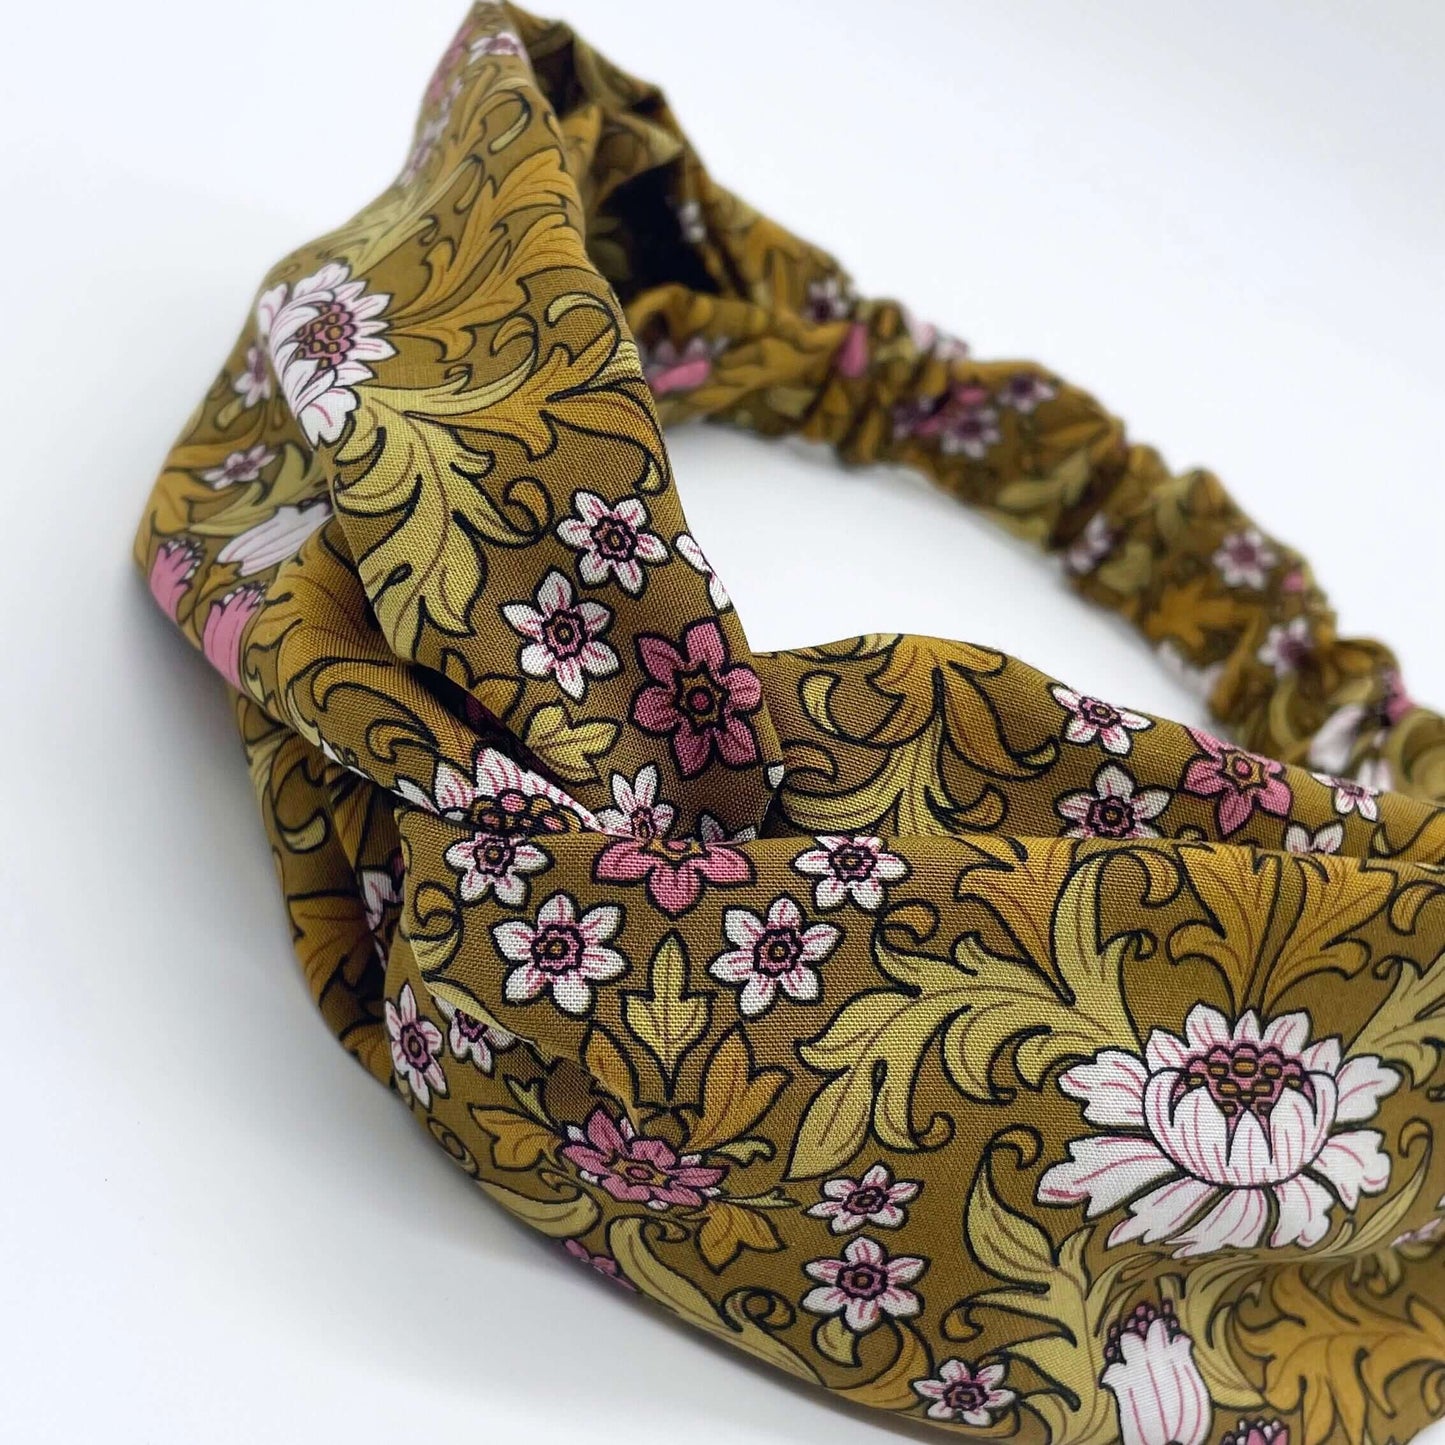 William Morris- Inspired Twist Headband in mustard yellow with flowers and leaves print